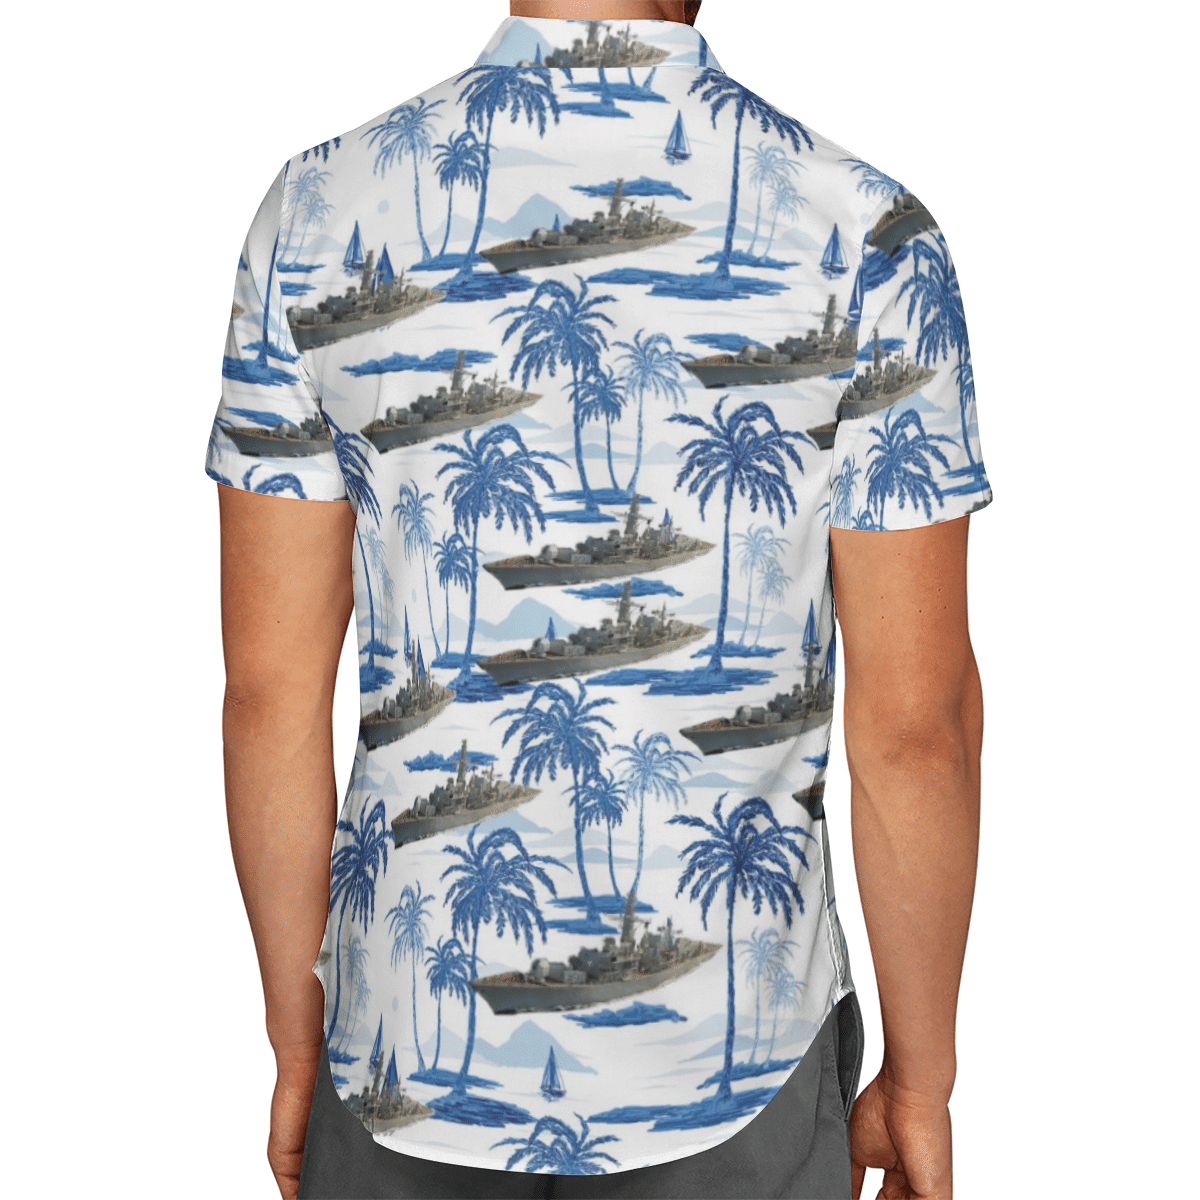 Going to the beach with a quality shirt 203